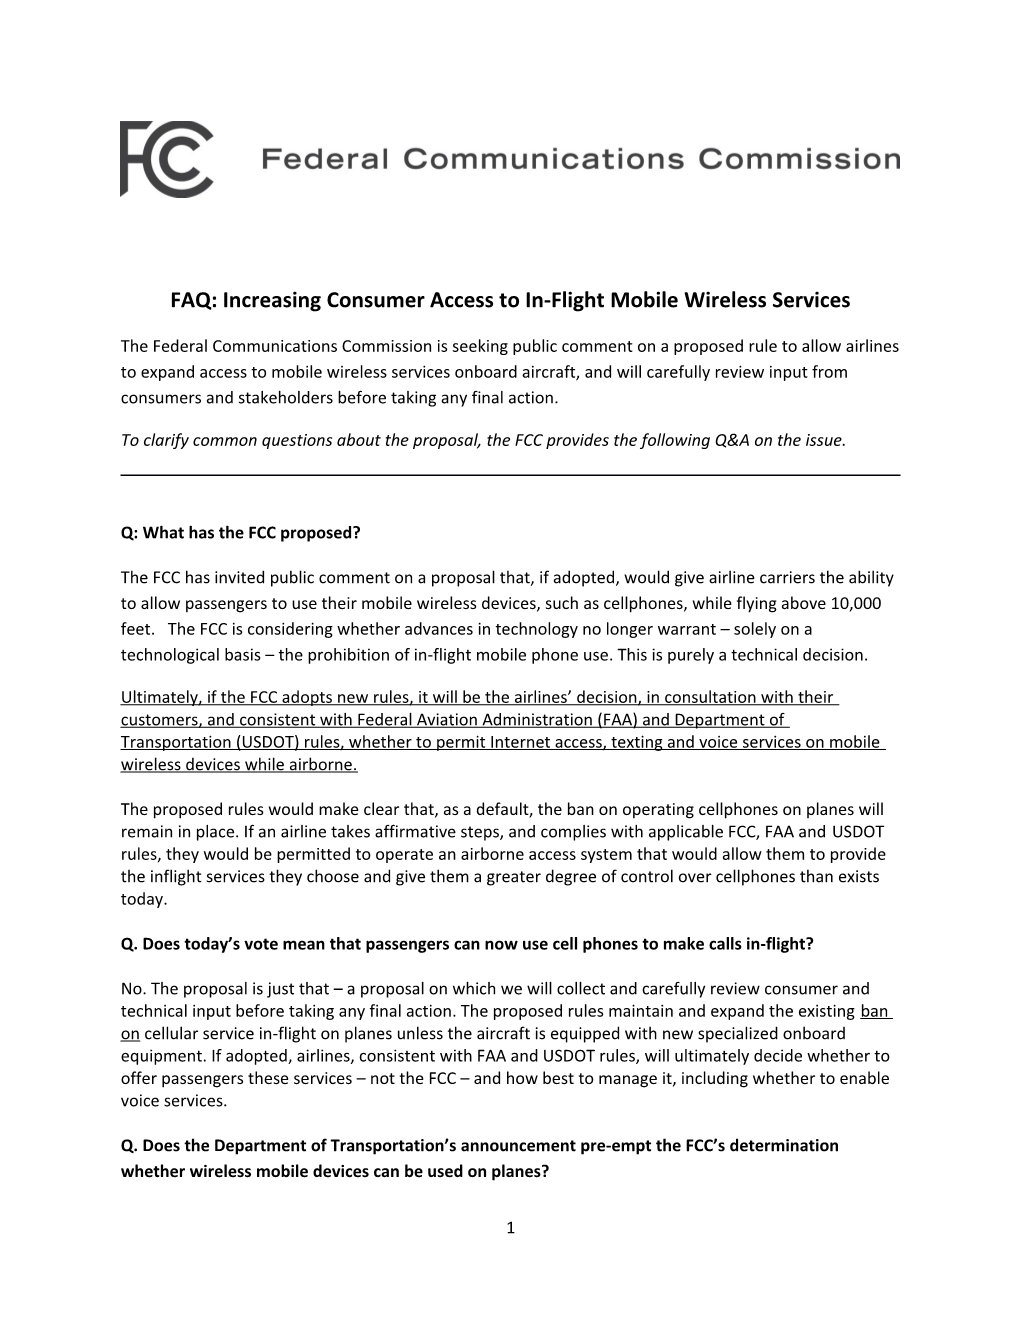 FAQ: Increasing Consumer Access to In-Flight Mobile Wireless Services